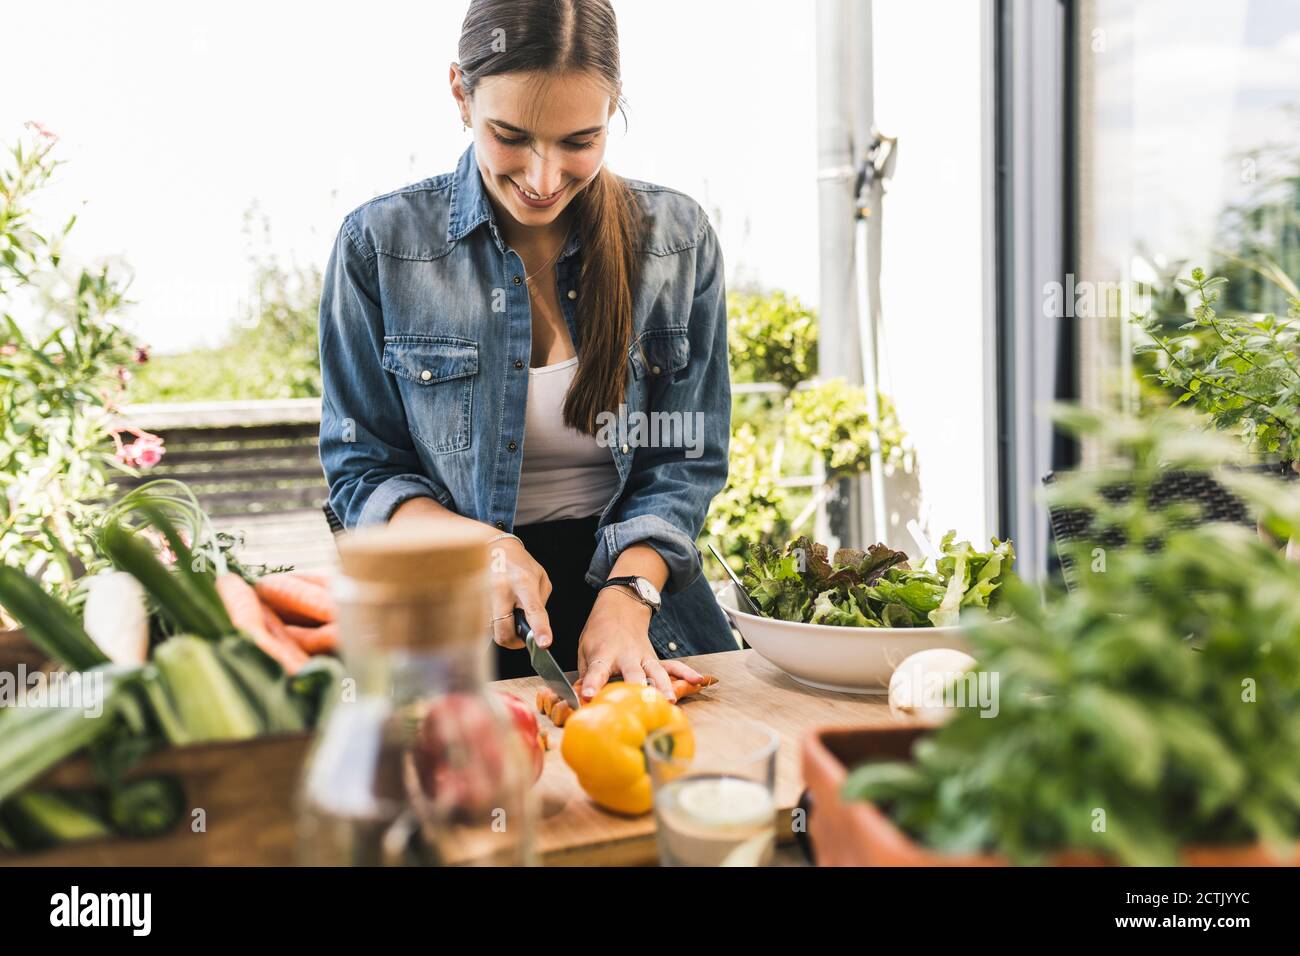 https://c8.alamy.com/comp/2CTJYYC/smiling-young-woman-chopping-vegetables-on-cutting-board-in-yard-2CTJYYC.jpg